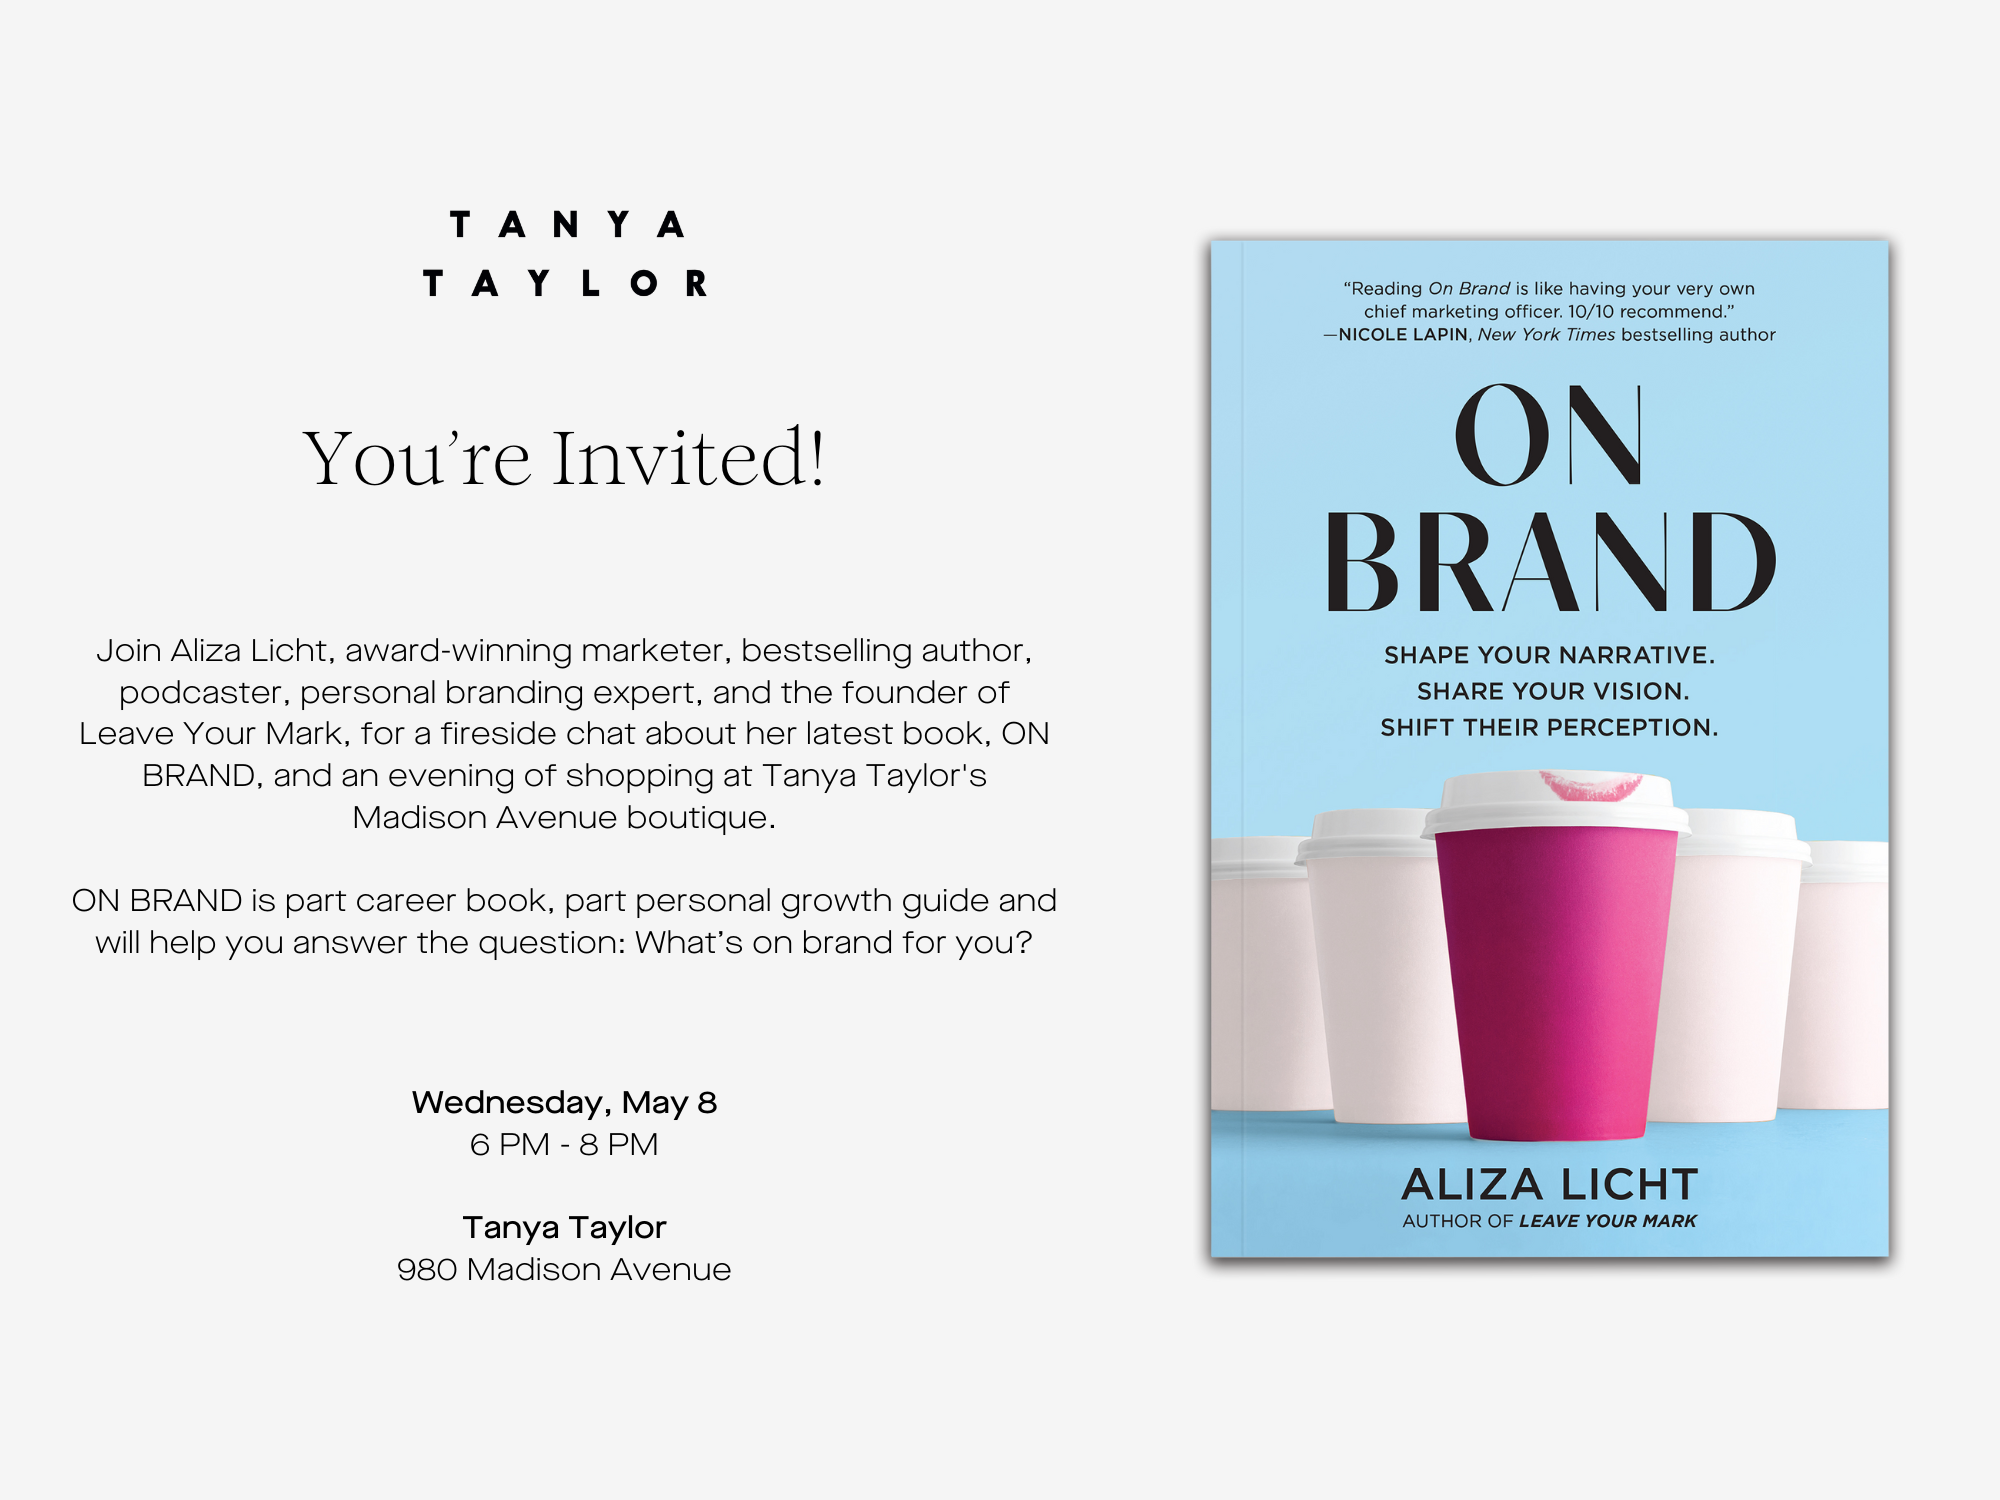 Join Me for an ON BRAND Book Event